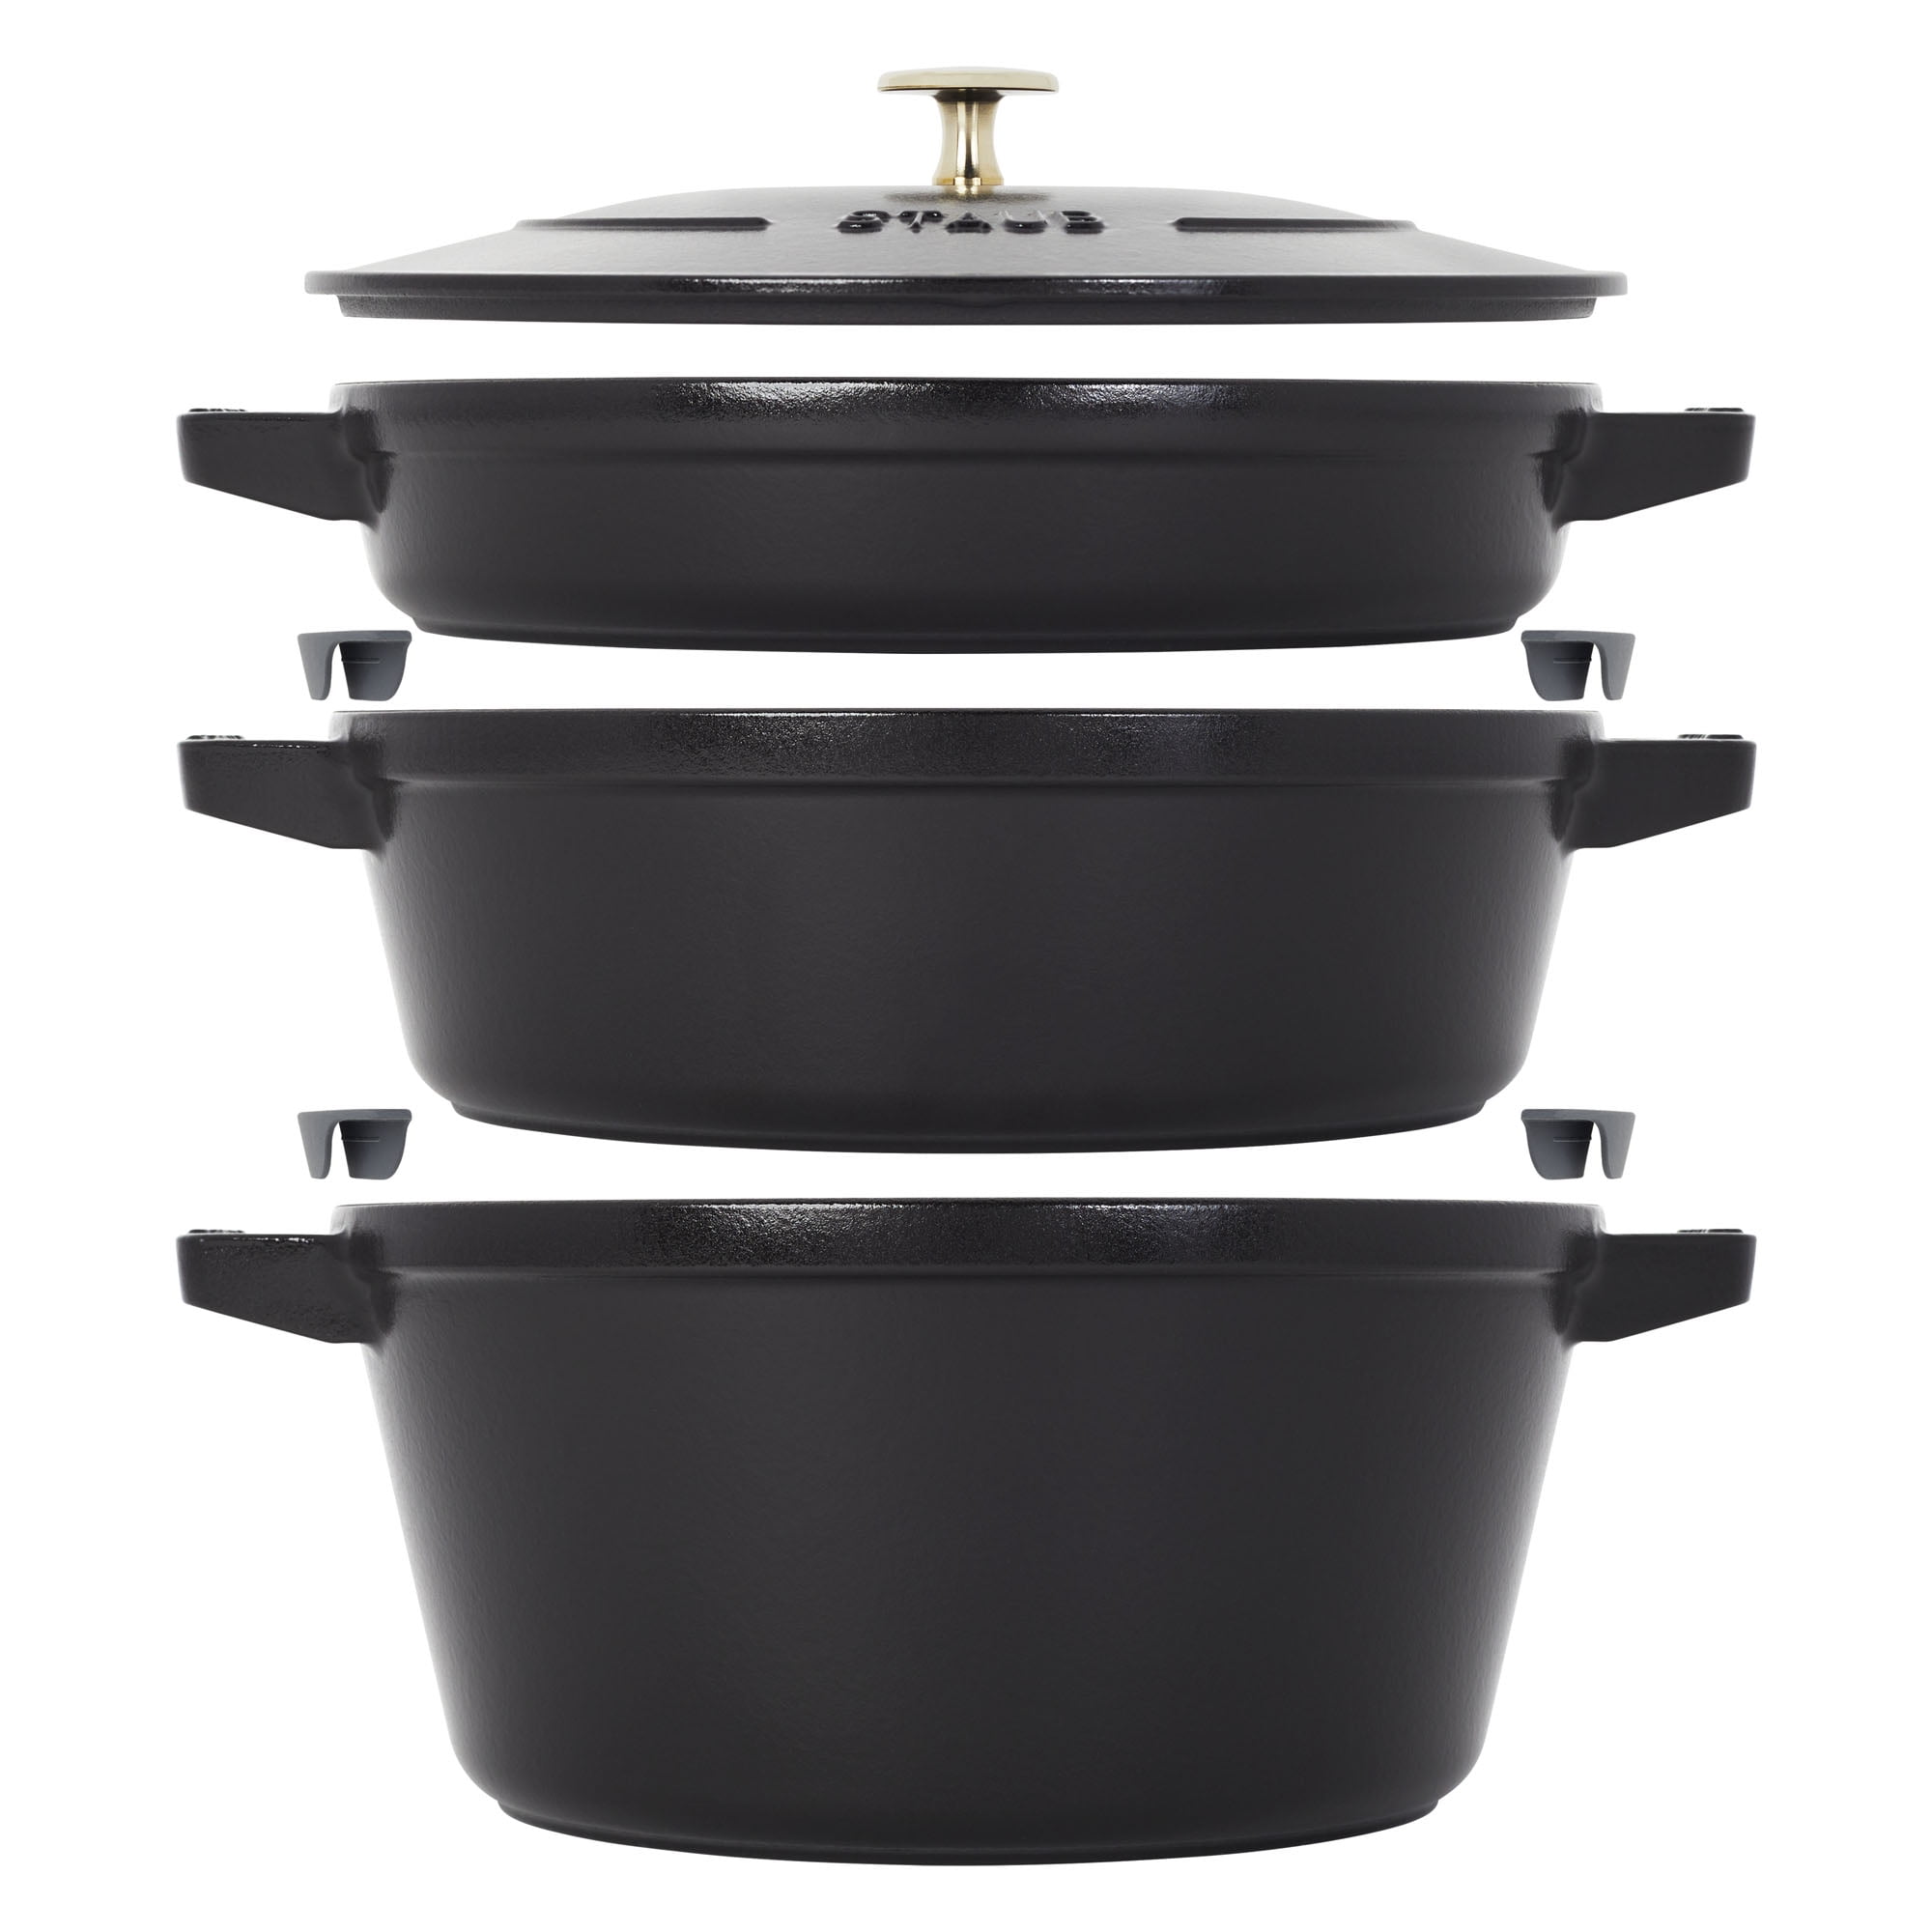  STAUB Cast Iron Set 4-pc, Stackable Space-Saving Cookware Set,  Dutch Oven, Skillet, Grill Pan with Universal Lid, Made in France, Cherry:  Home & Kitchen